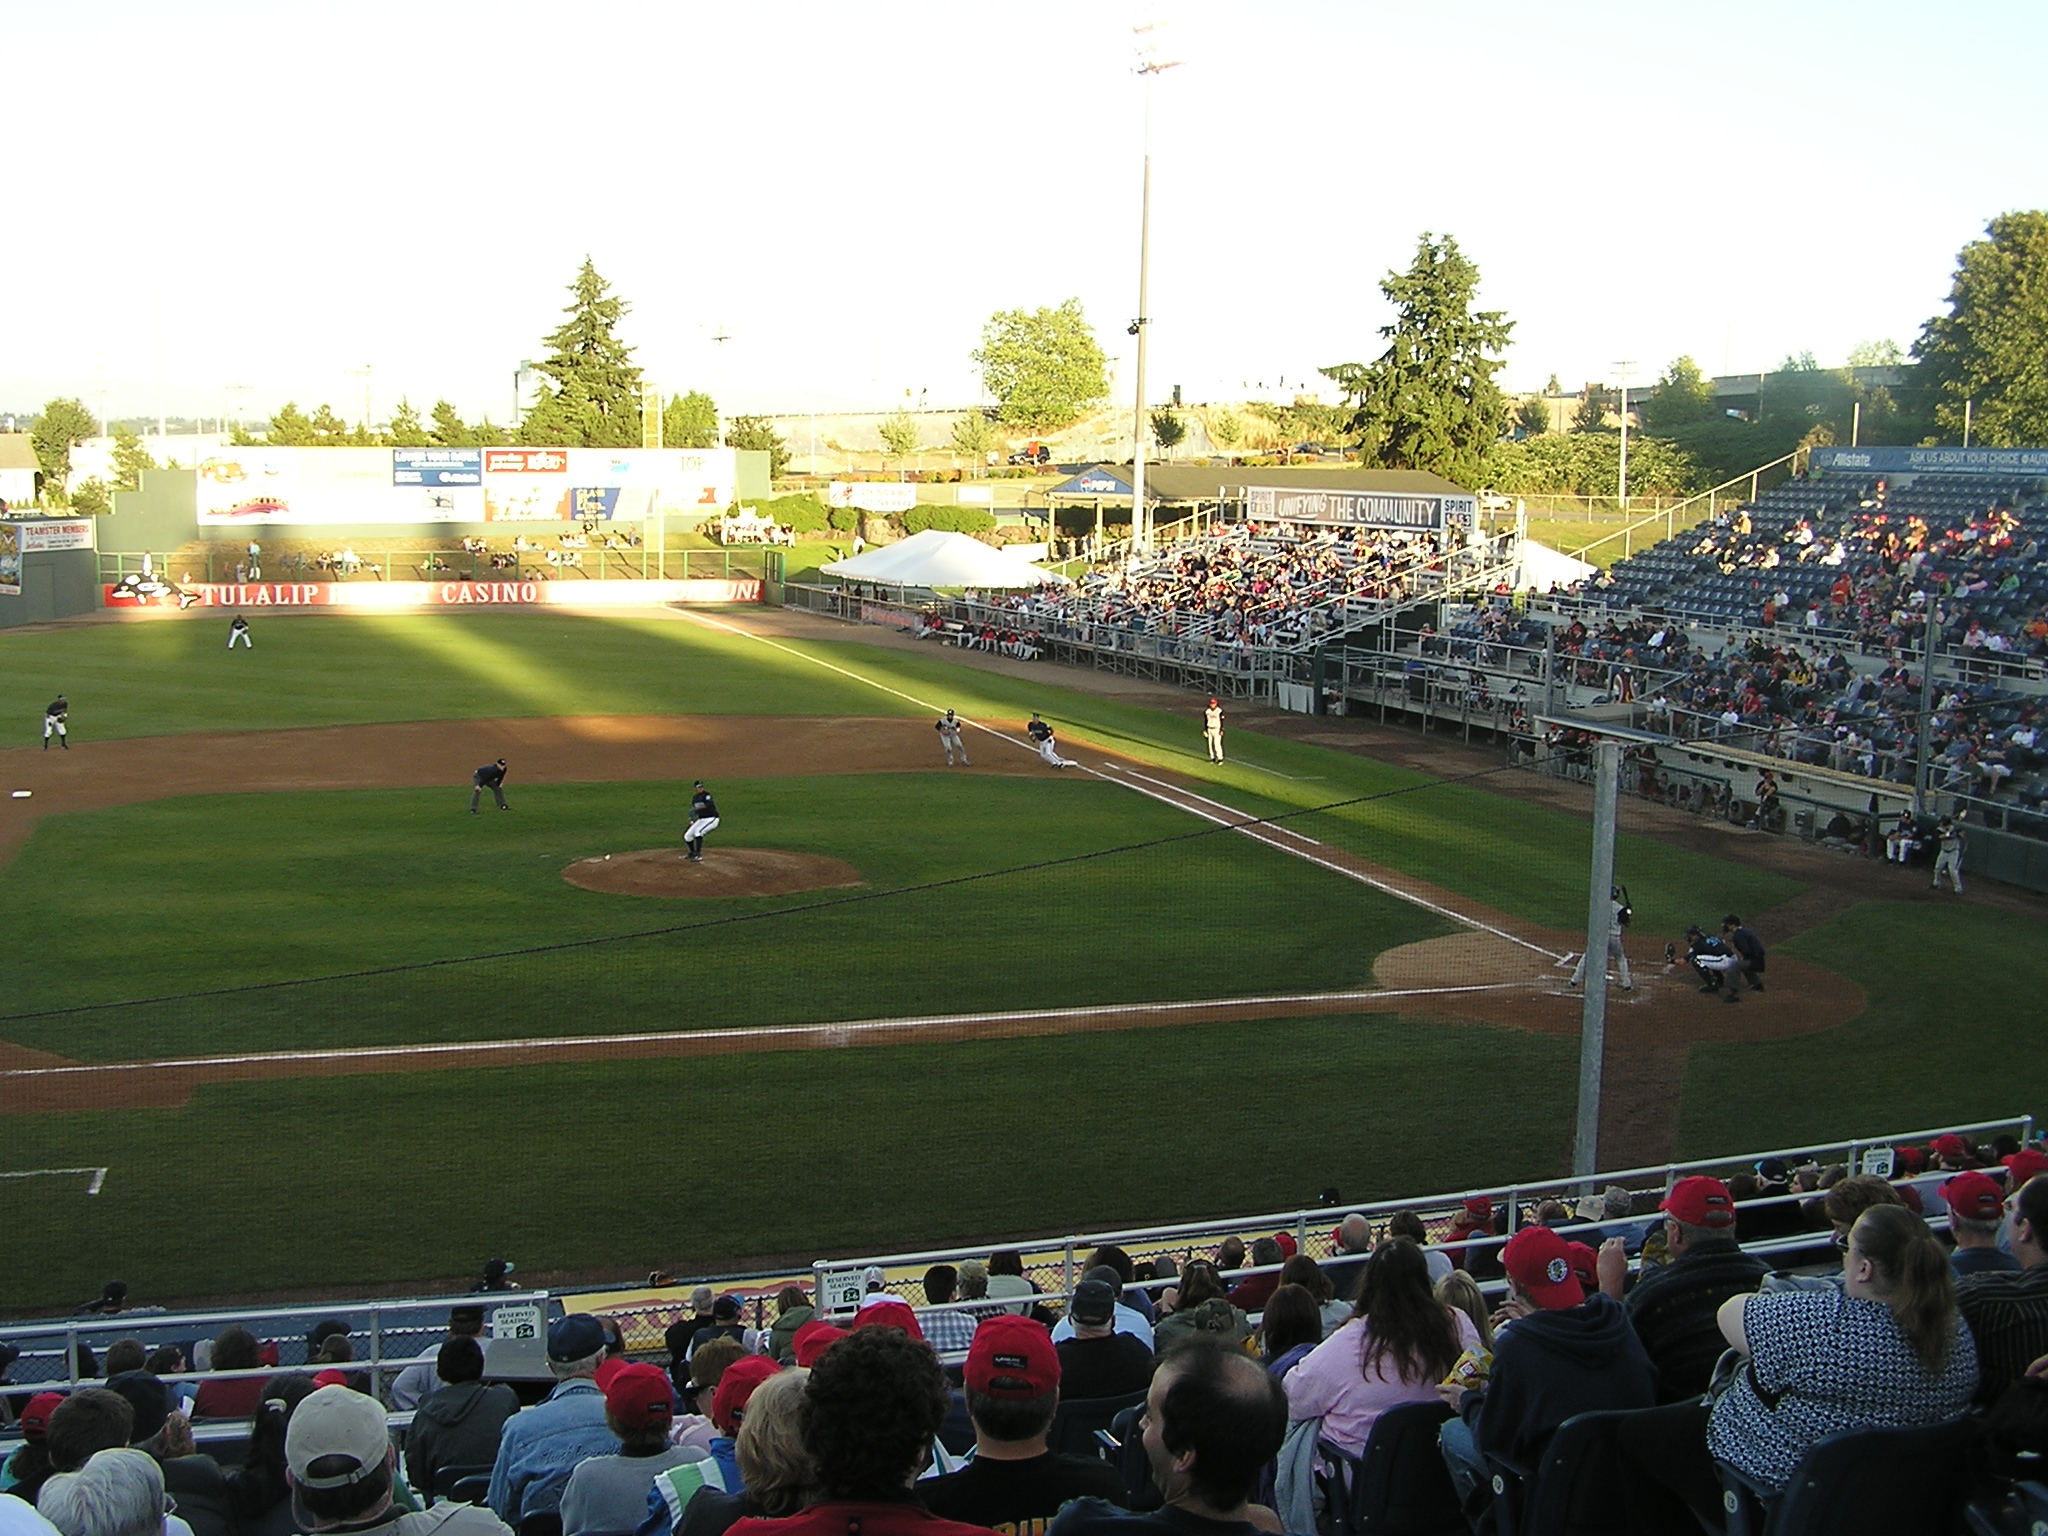 A view from the 3rd base side - Everett Washington